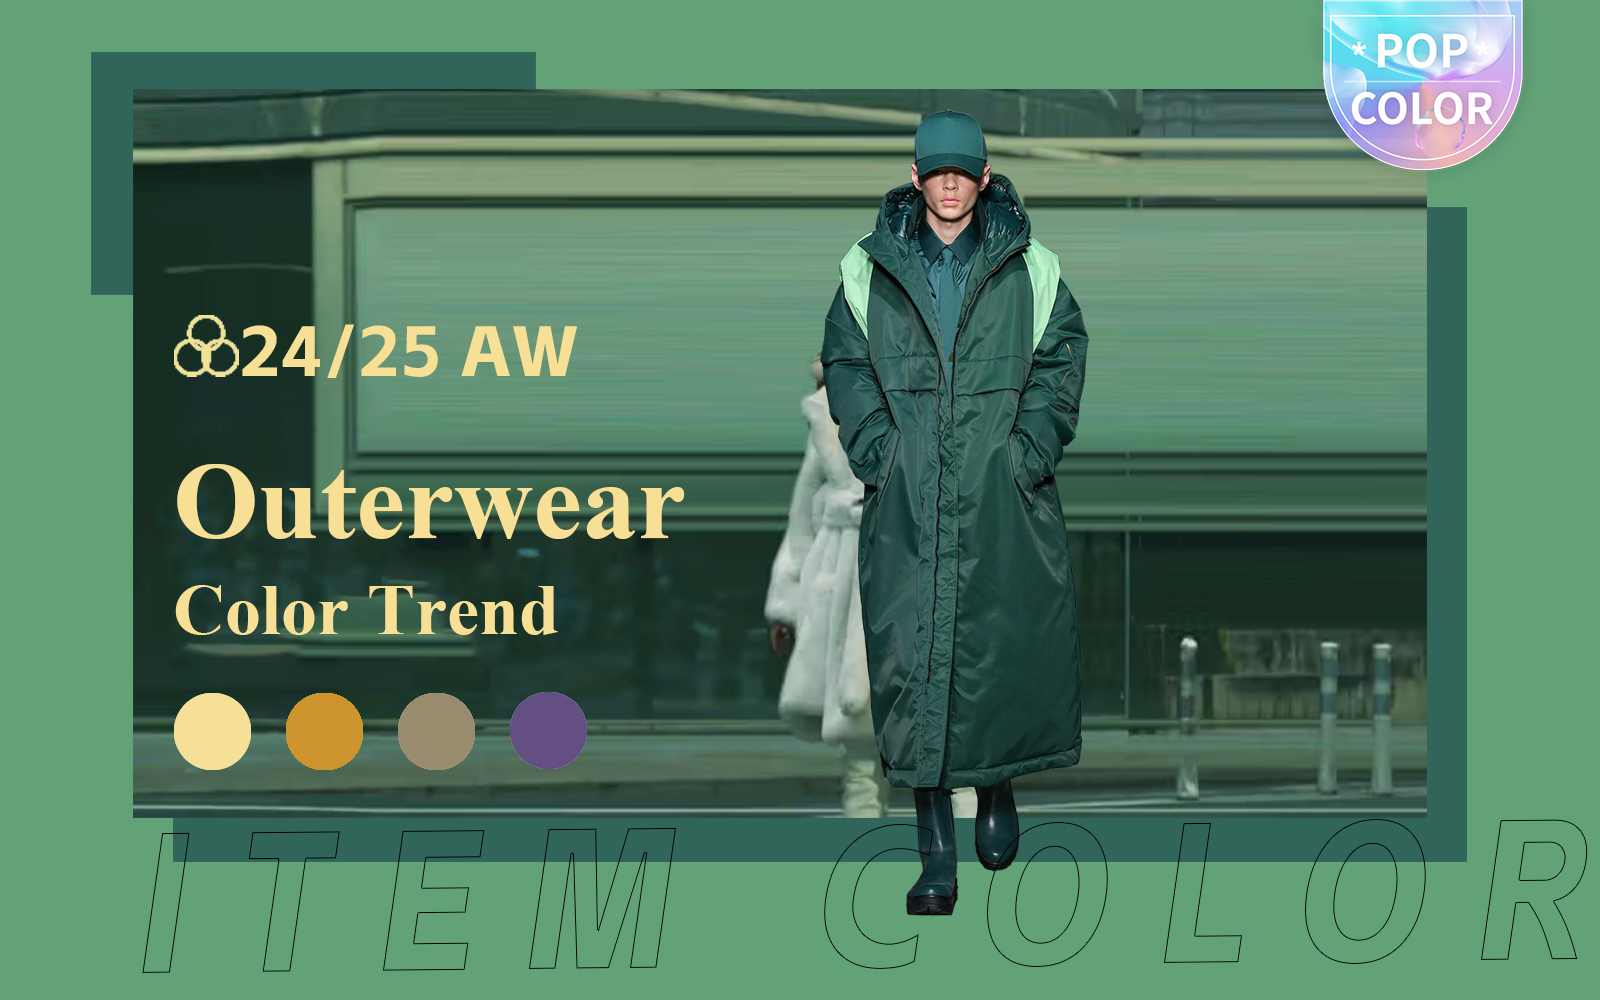 Endless Combinations -- The Color Trend for Men's Outerwear